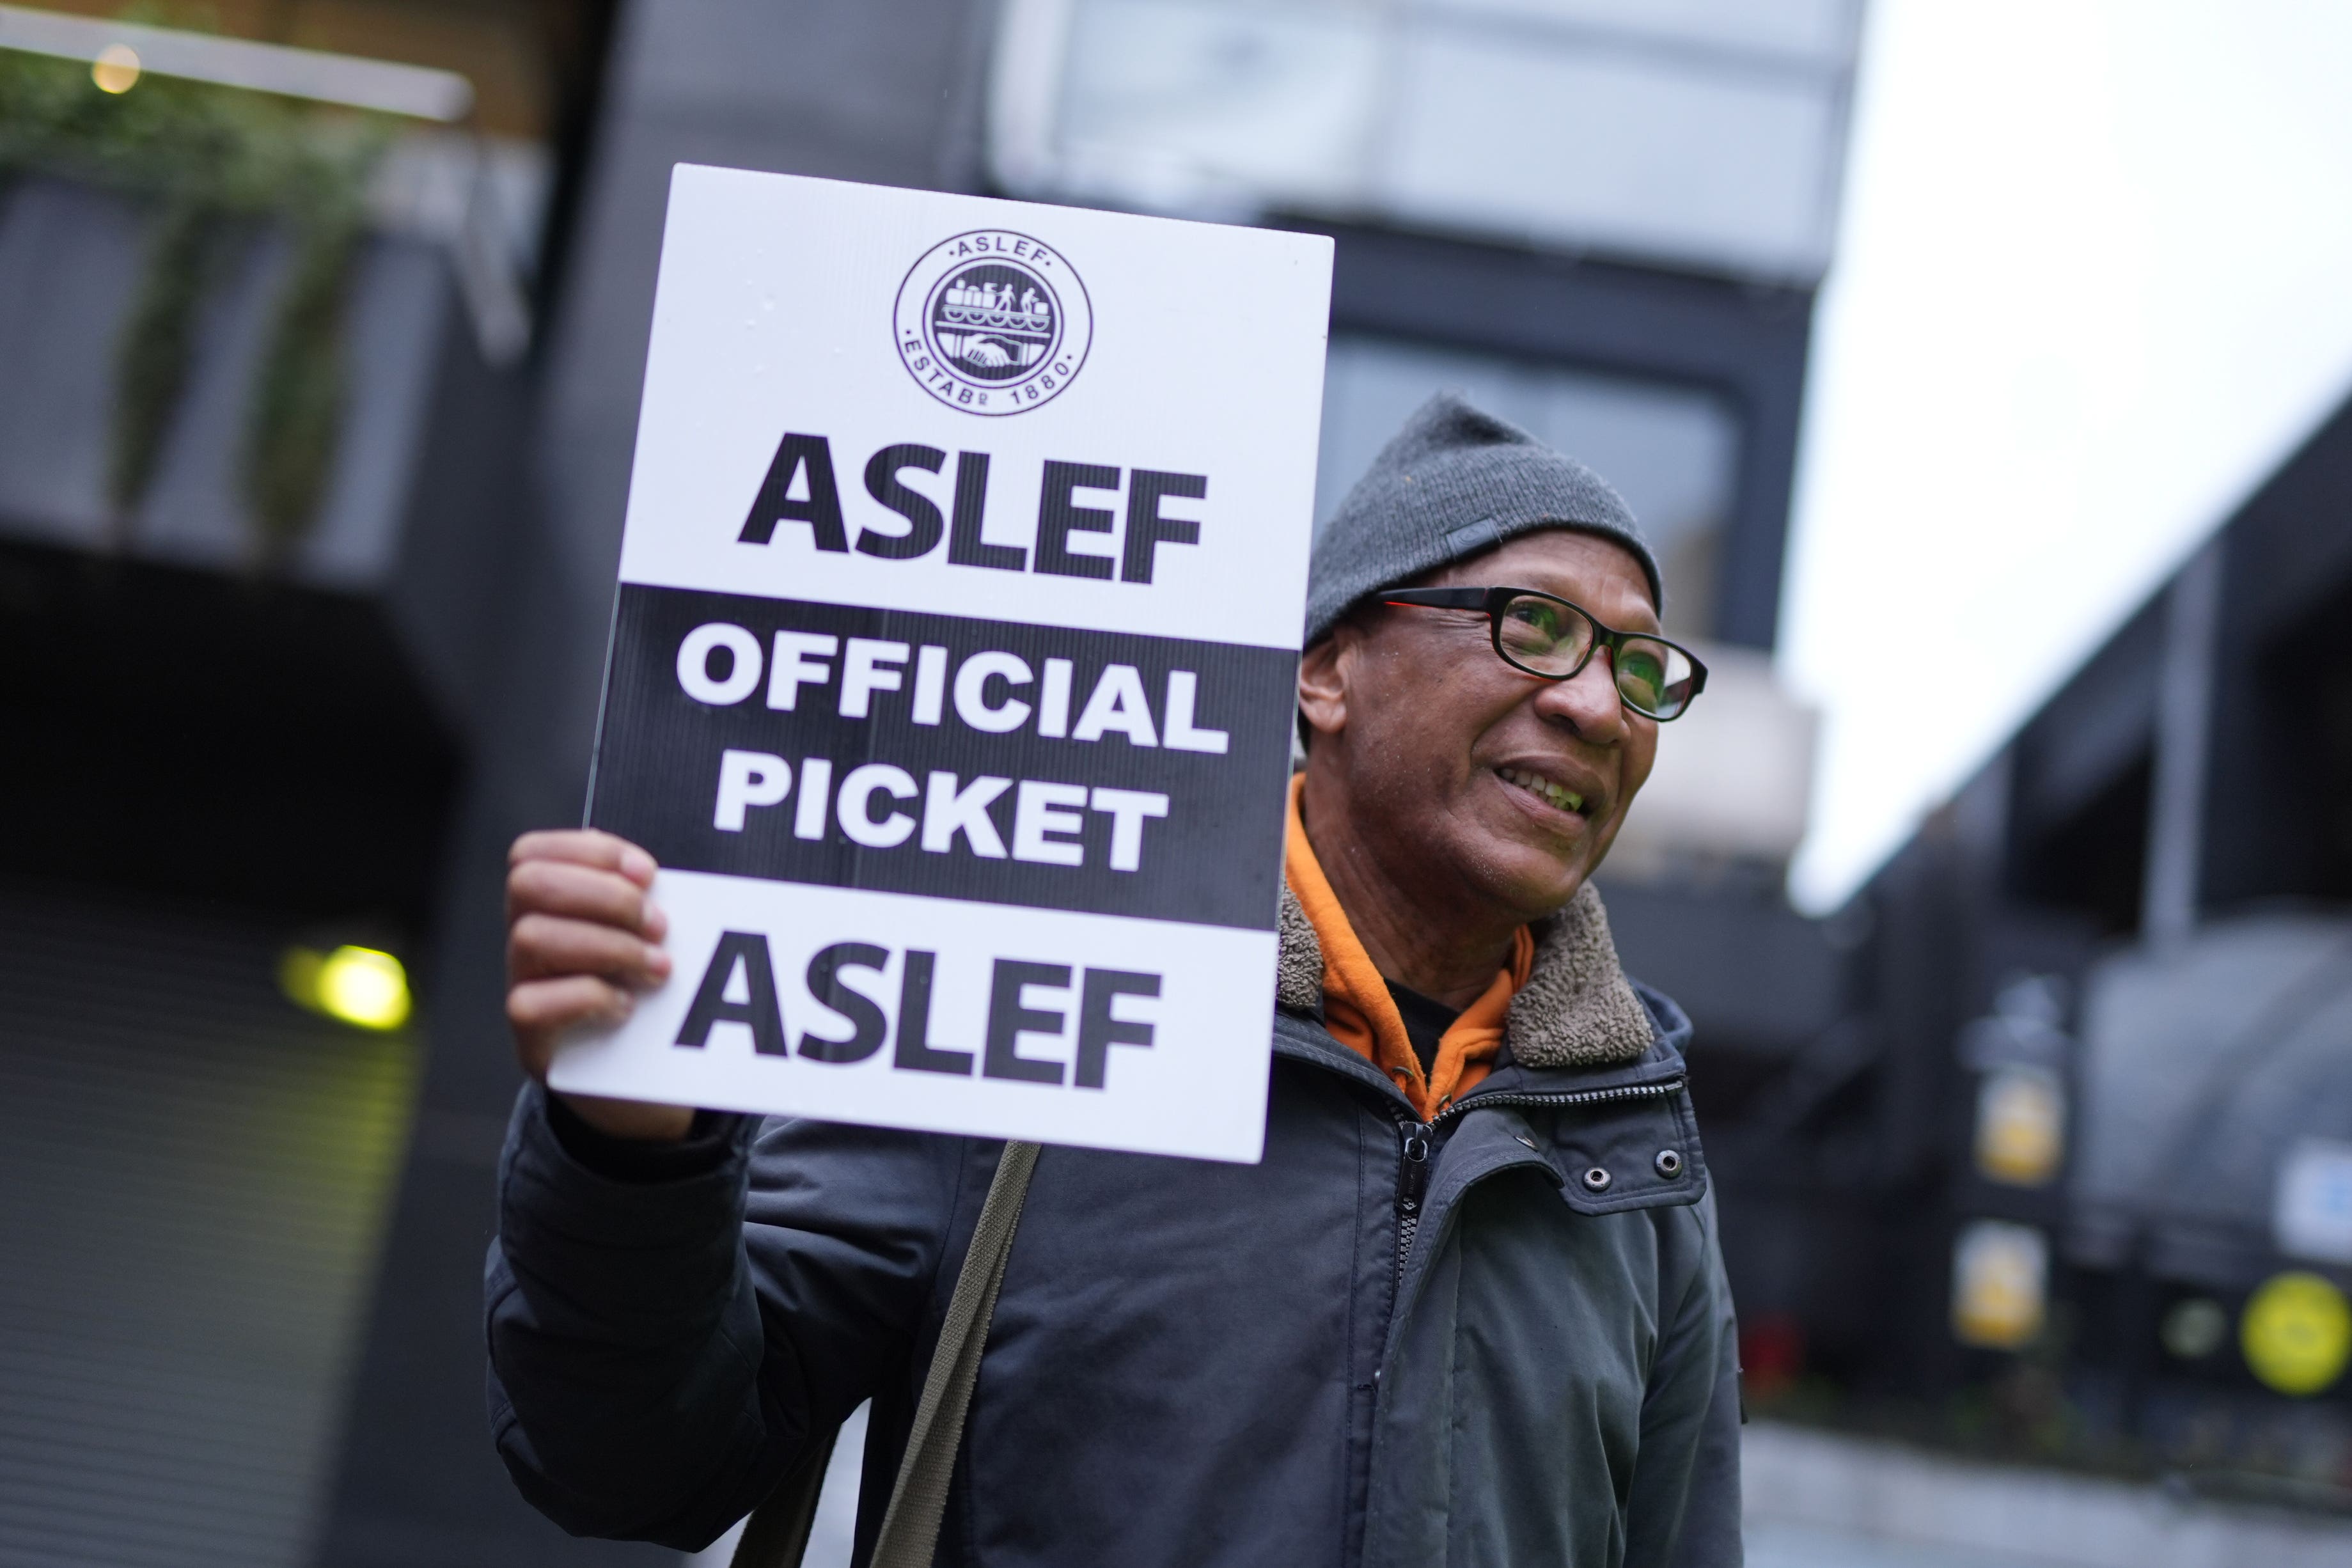 Train drivers from the Aslef union on the picket line at Euston station in London (Jordan Pettitt/PA)